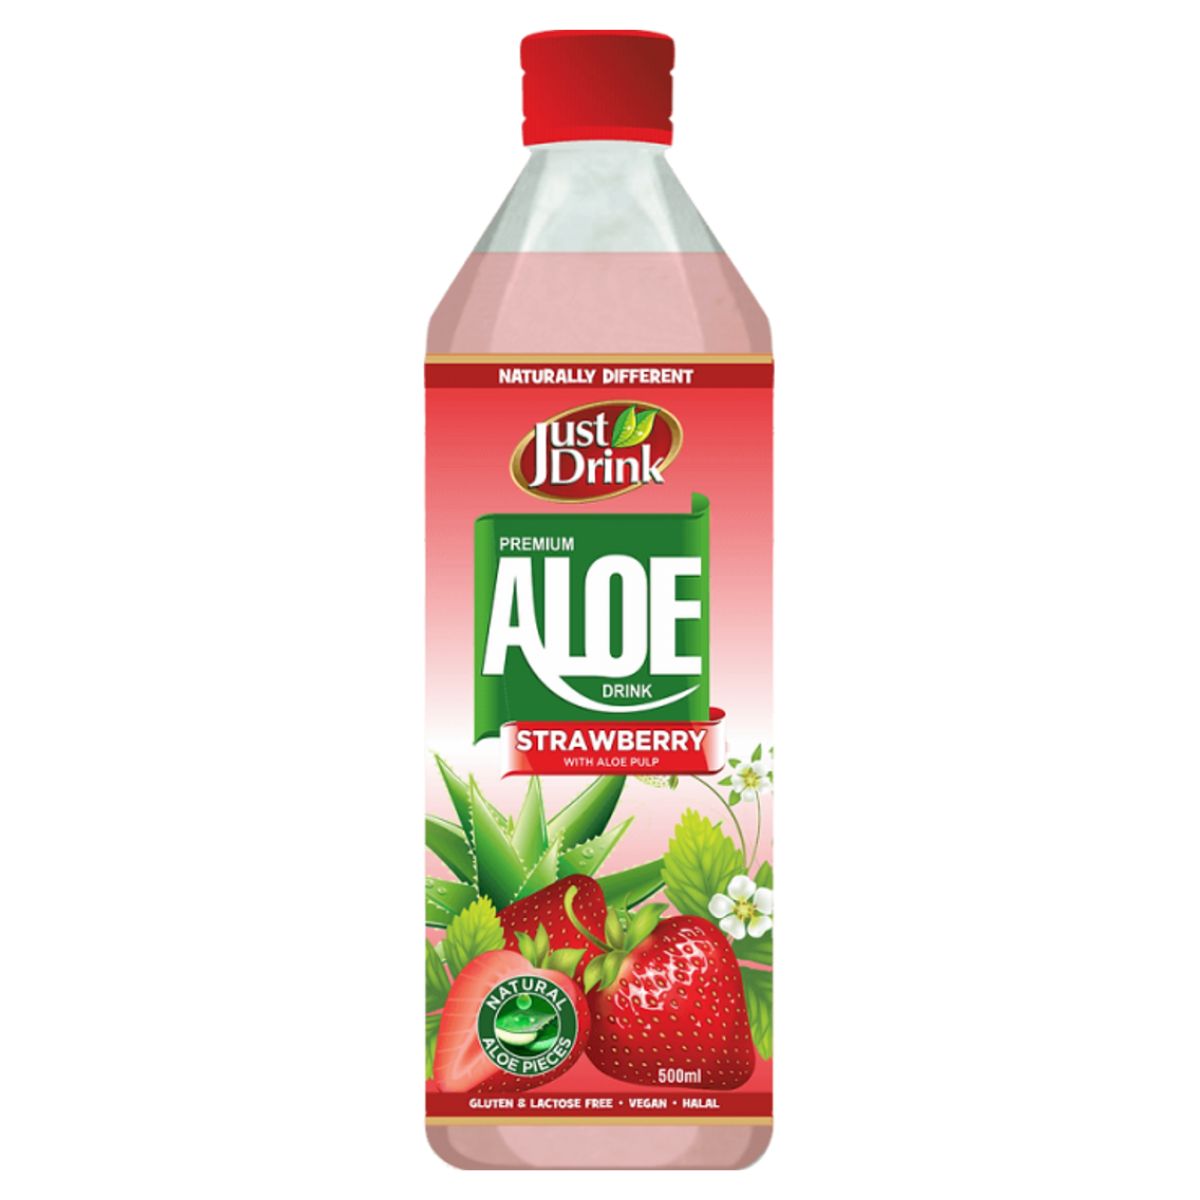 A bottle of Just Drink - Aloe Vera Strawberry Drink - 500ml with strawberries on a white background.